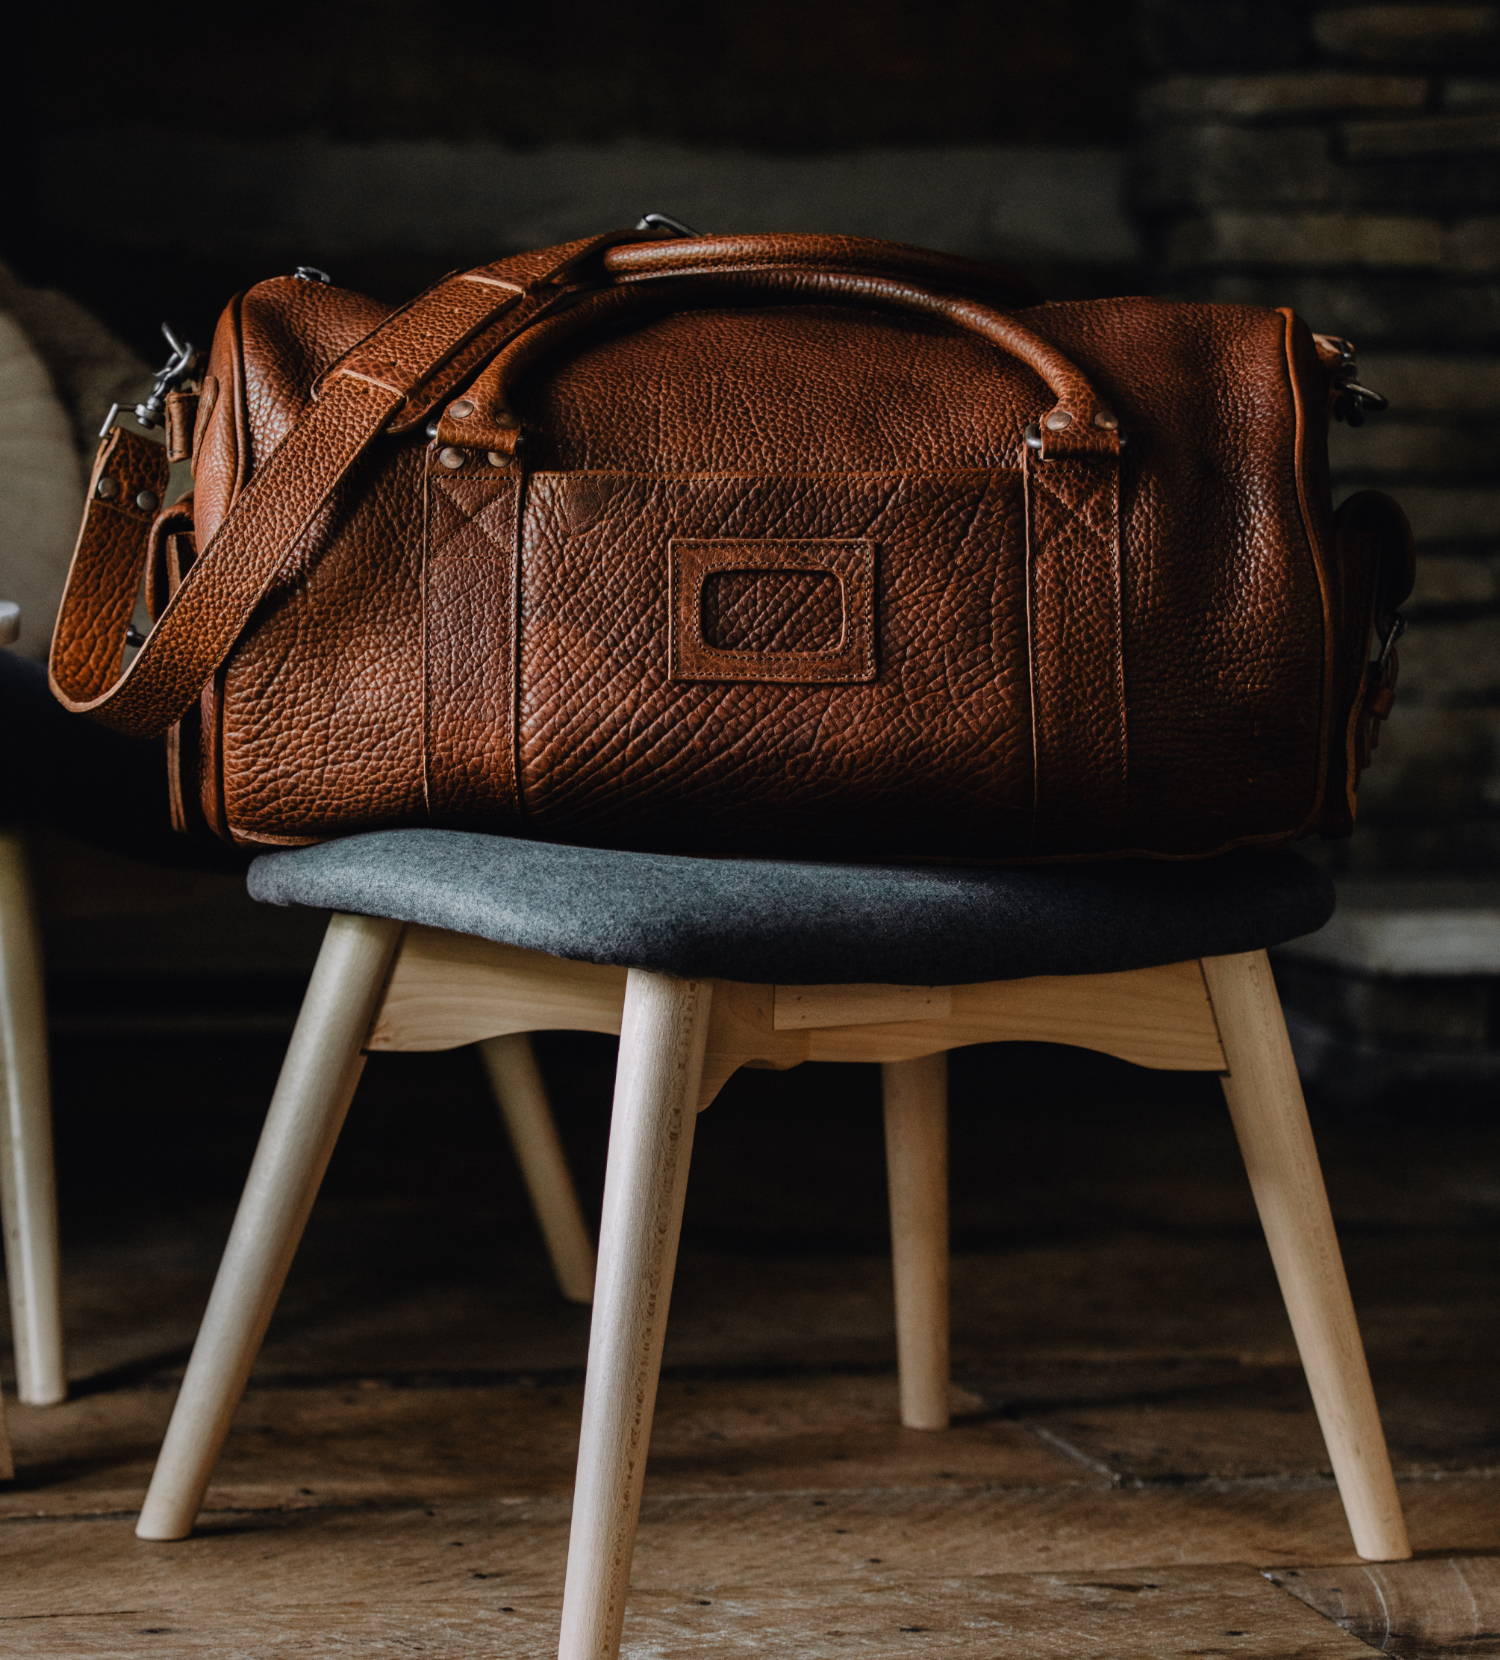 Full grain leather vs. top grain leather: What's the difference?